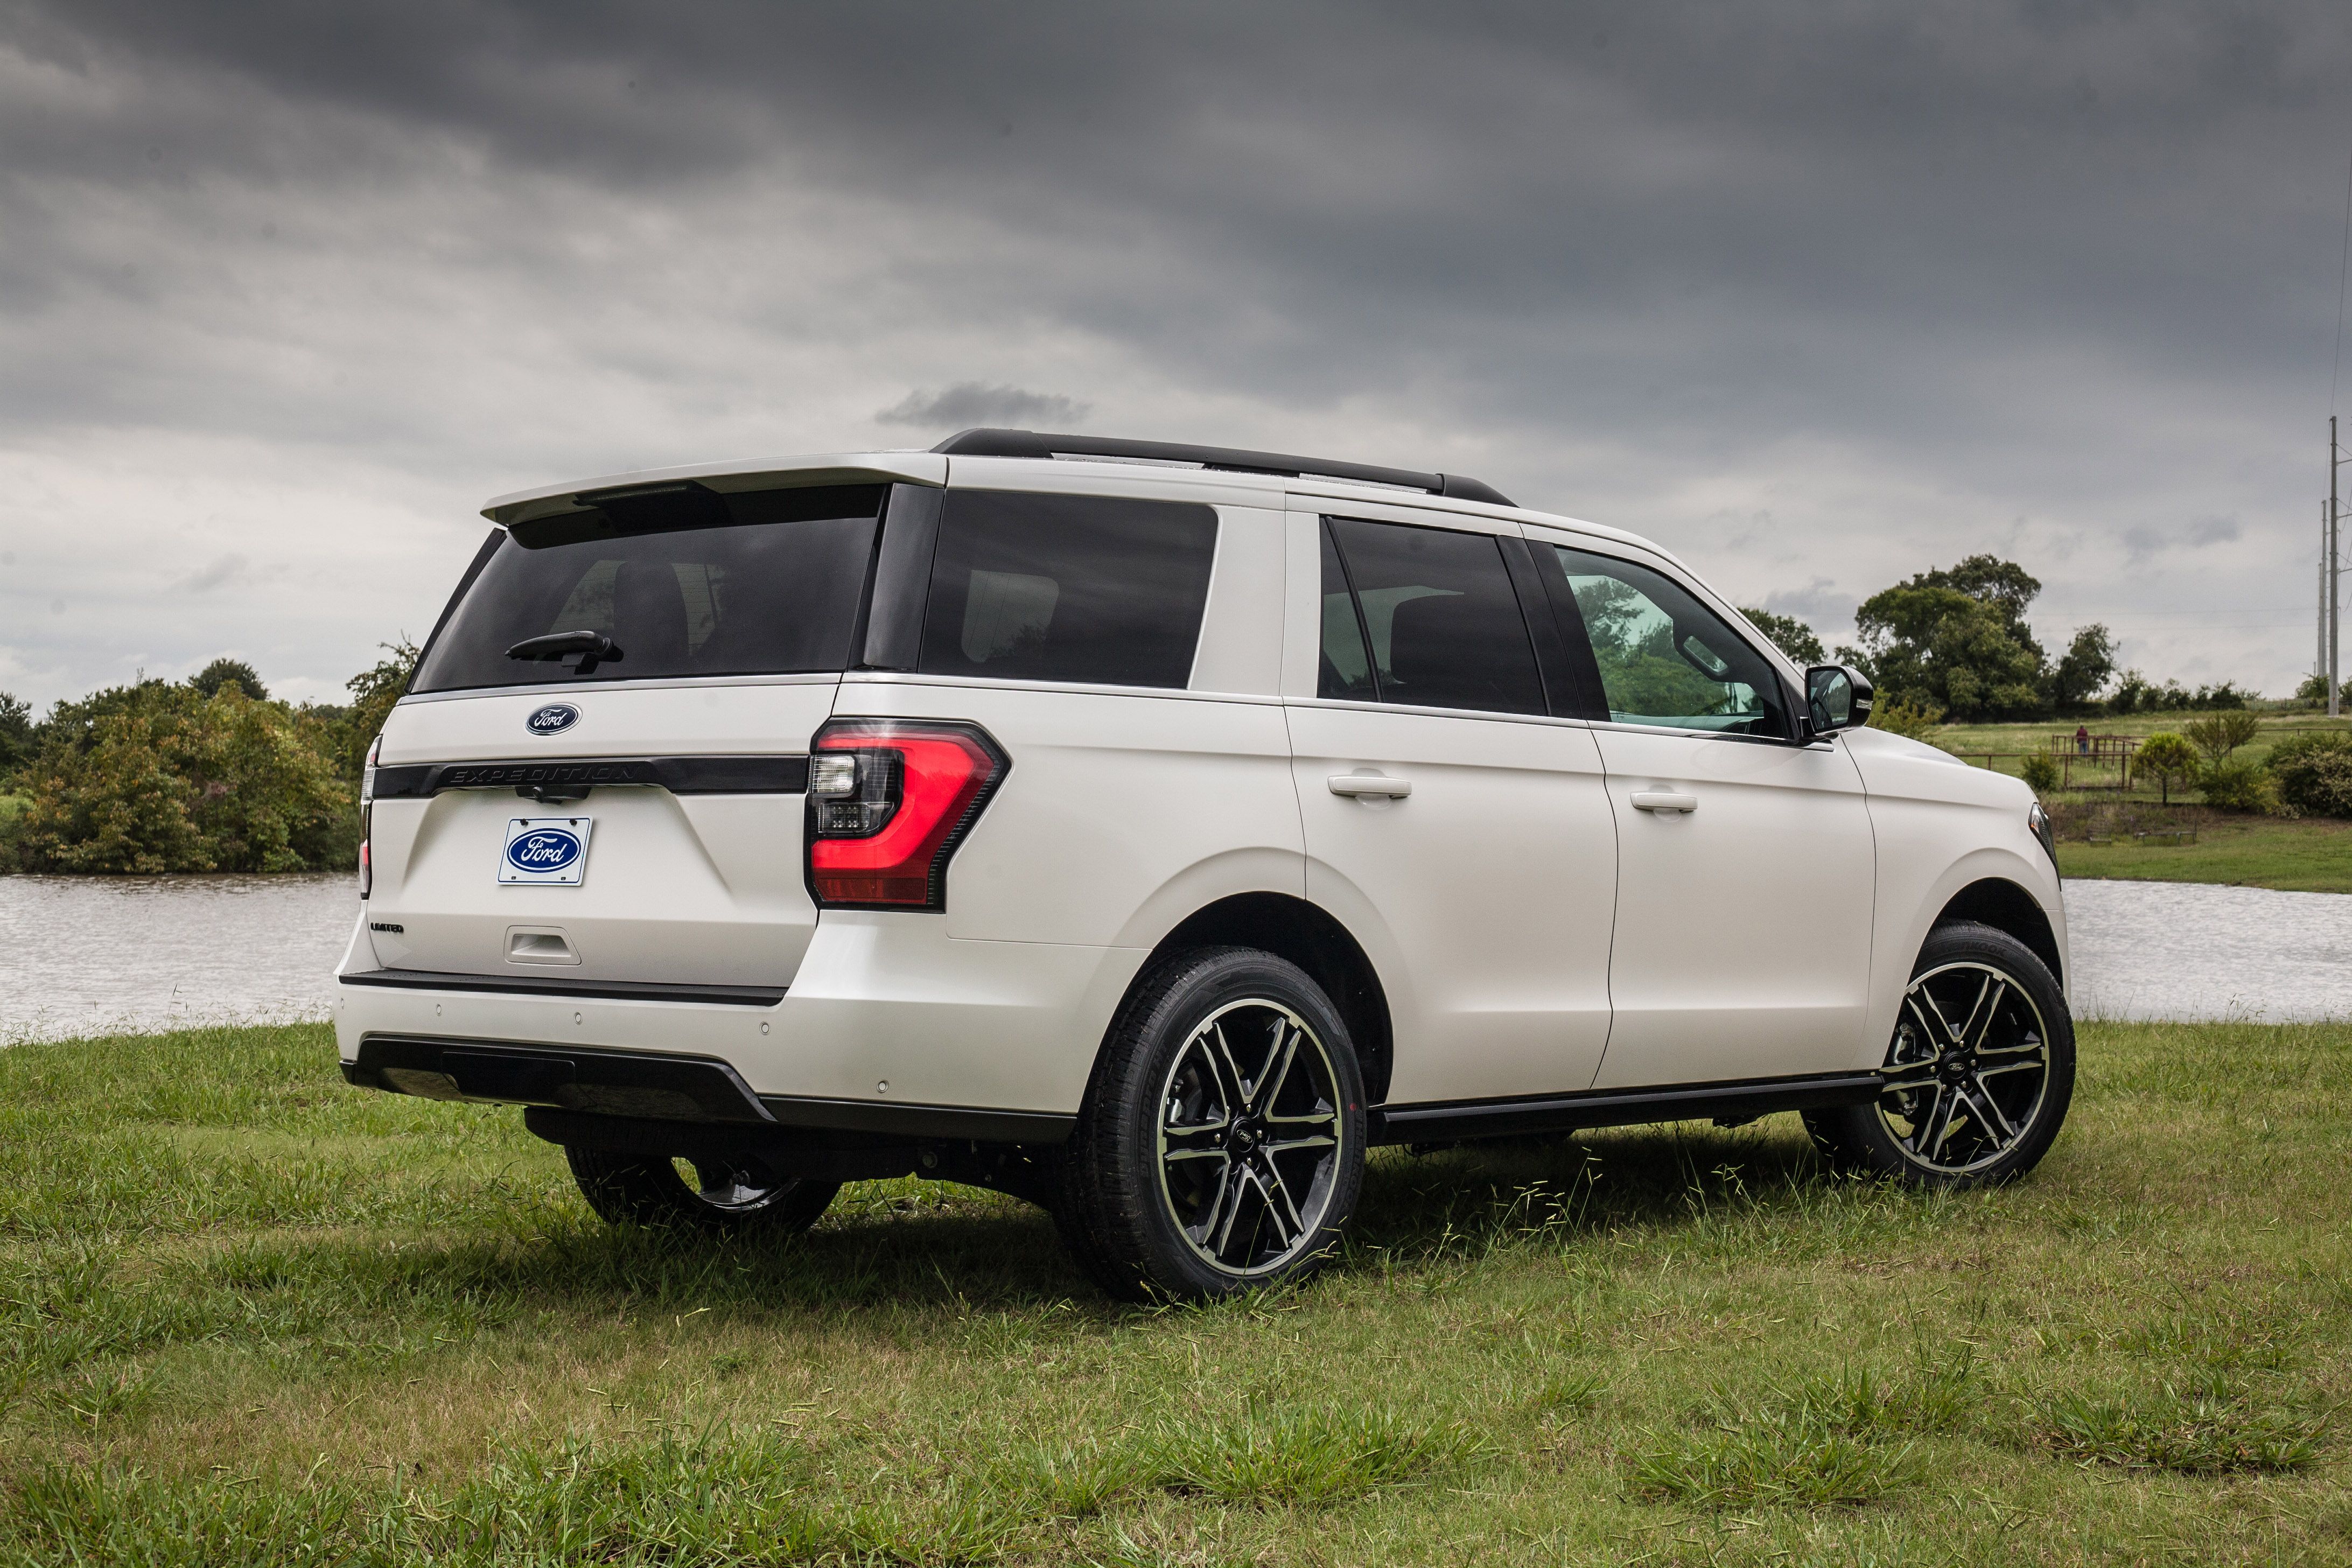 2019 Ford Expedition and Expedition Max Detailed Photos - Full Gallery